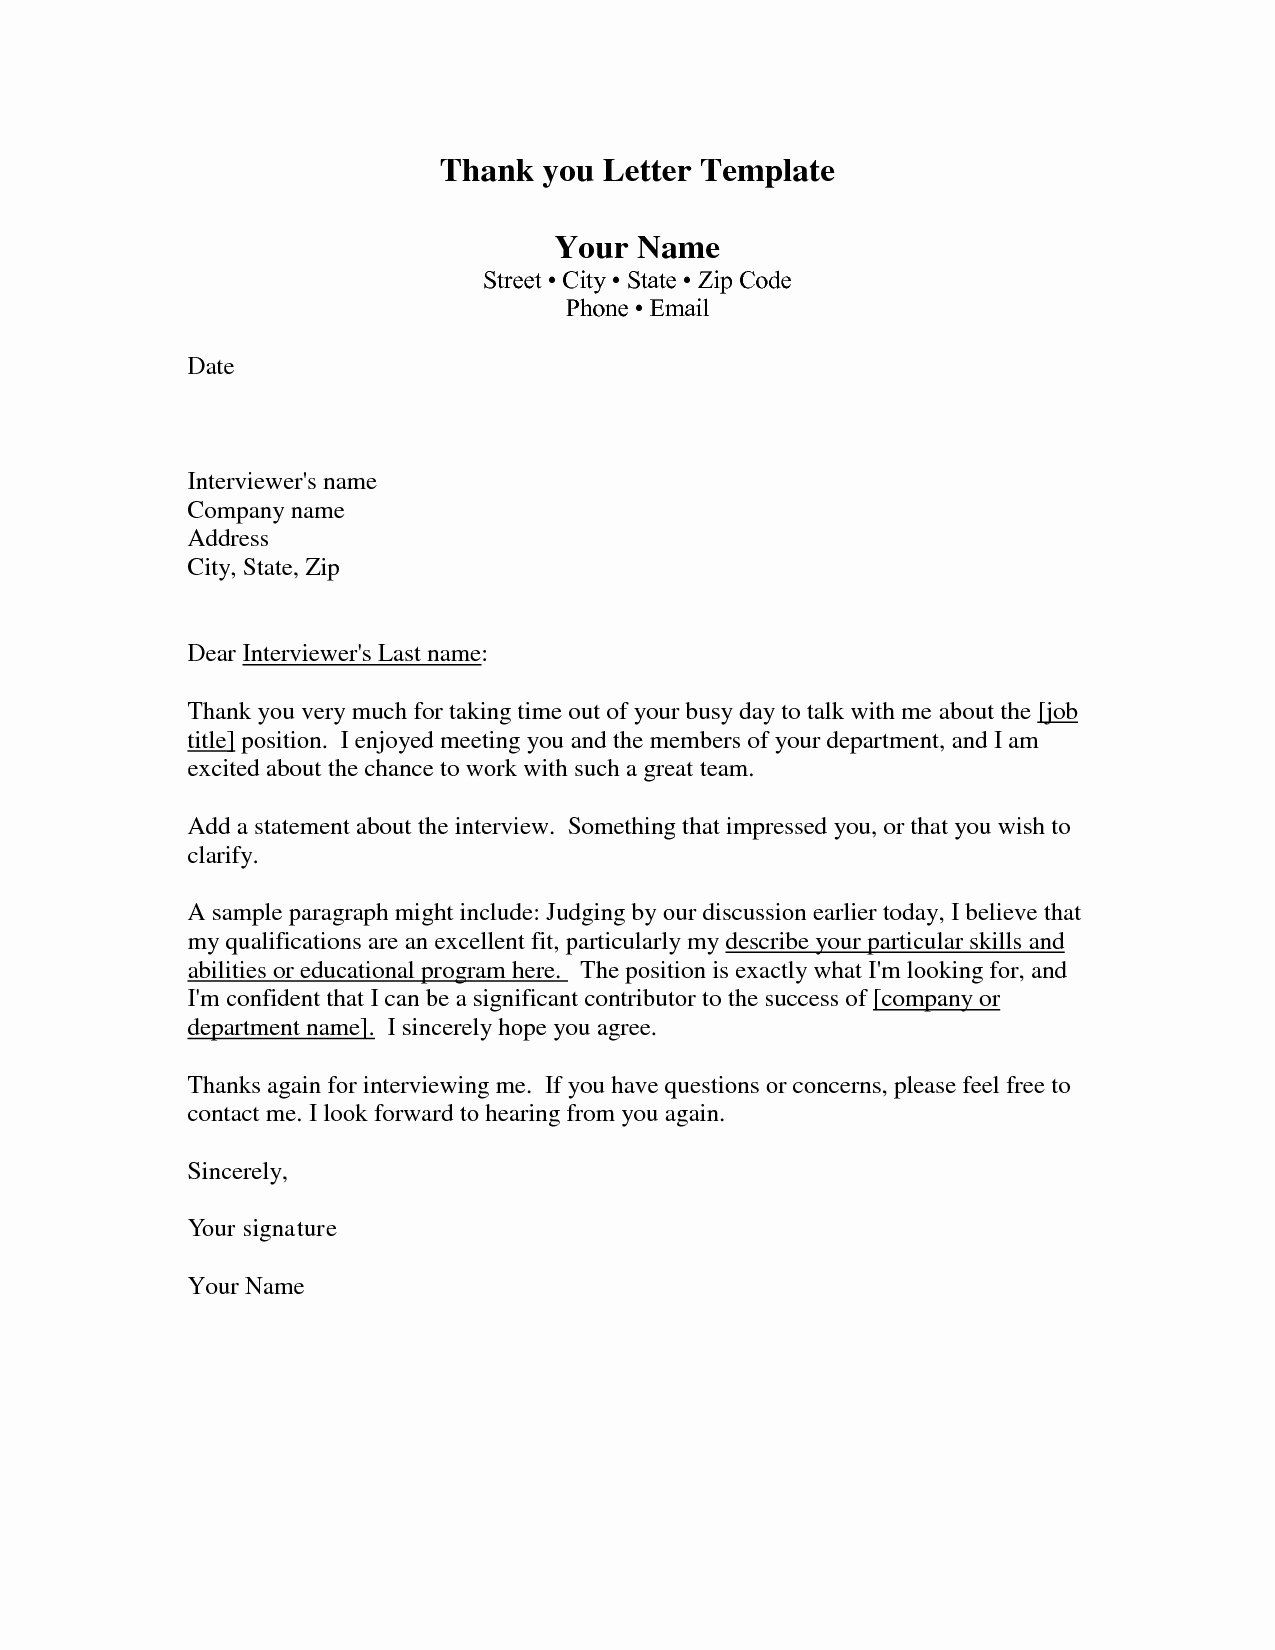 Thank You Letter Templates New Sample Professional Thank You Note